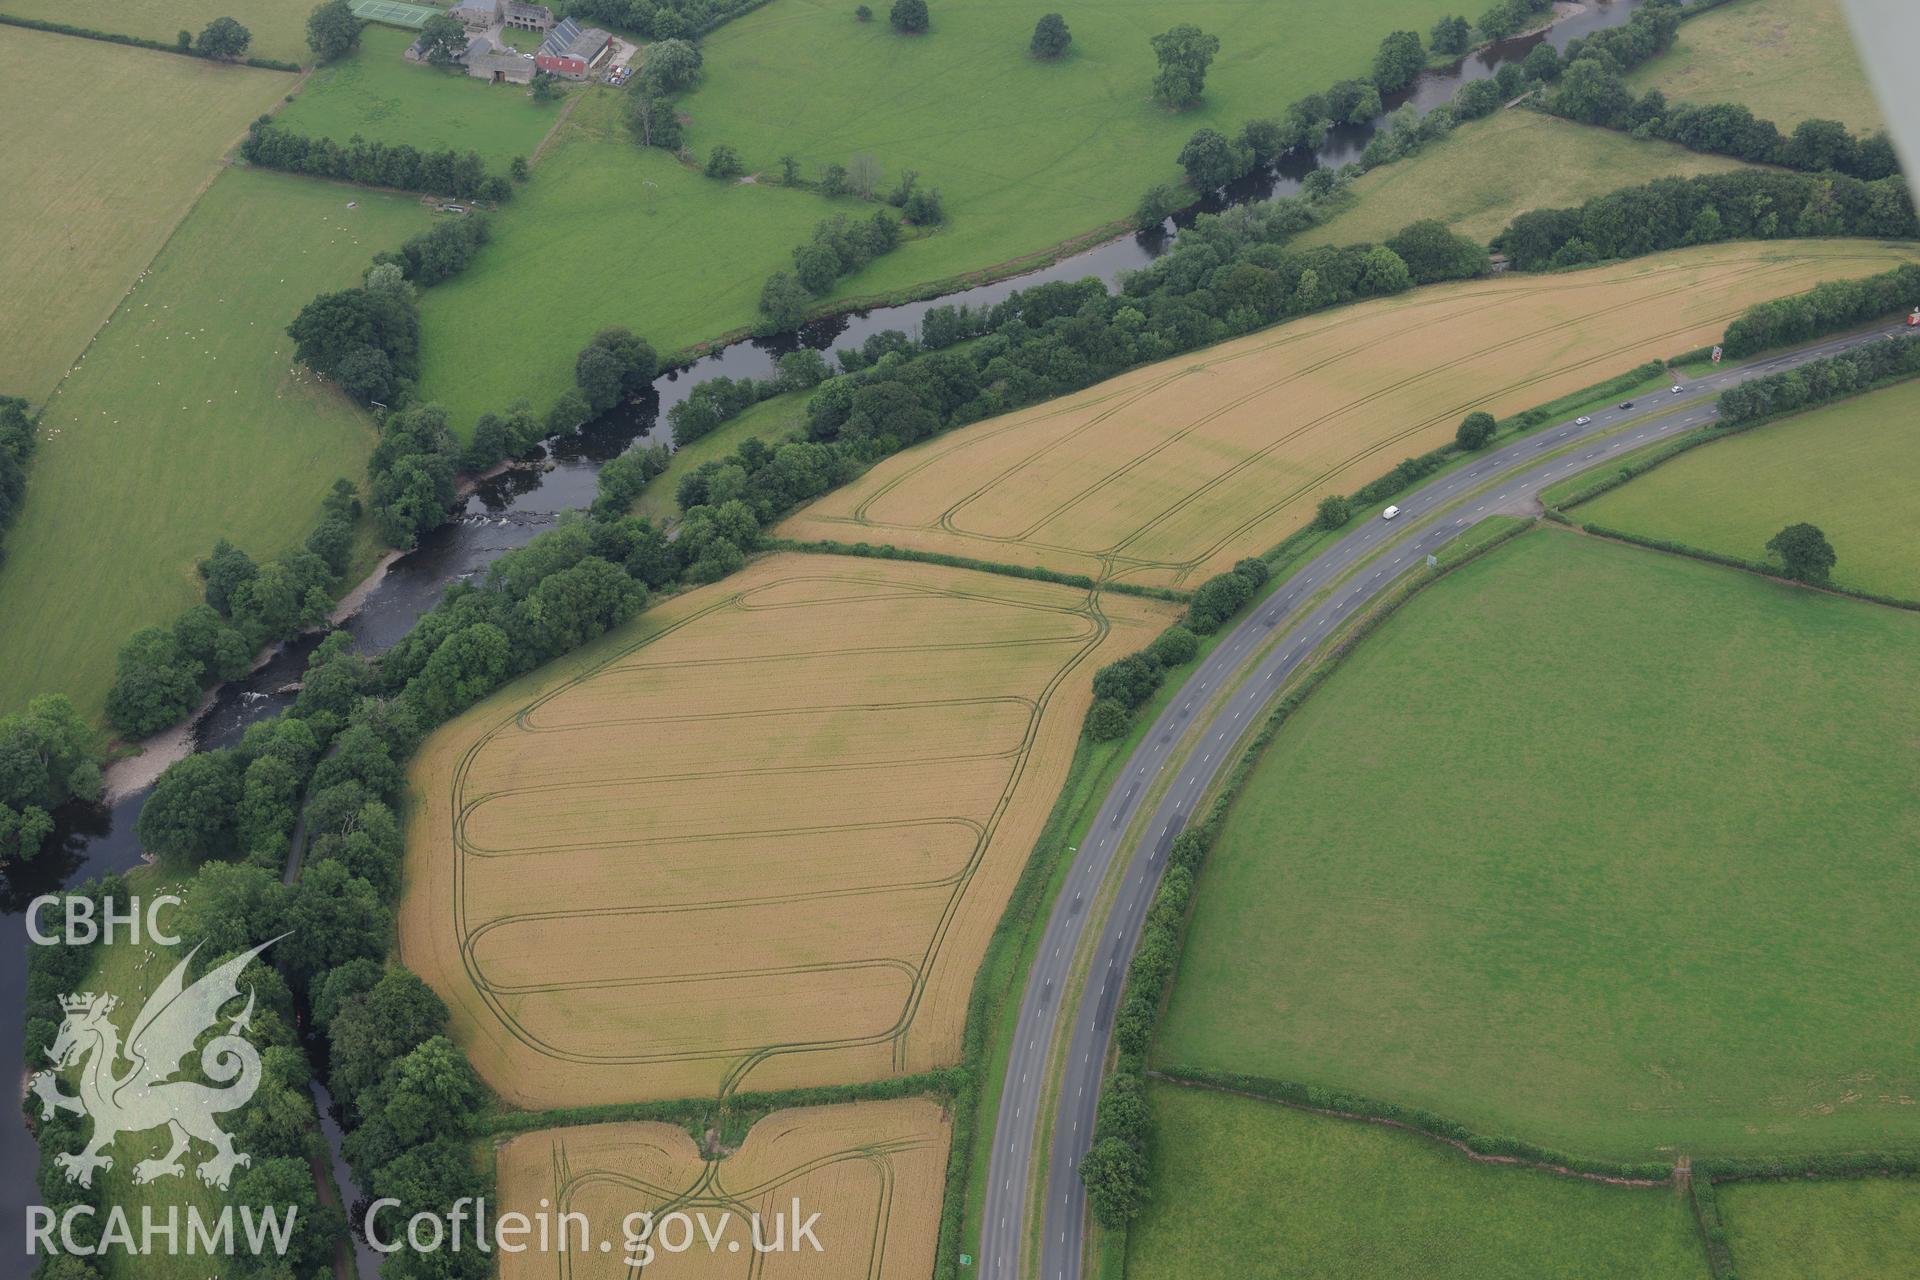 Cefn-brynich Roman fort, general view of cropmarks from east, taken by RCAHMW 1st August 2013.